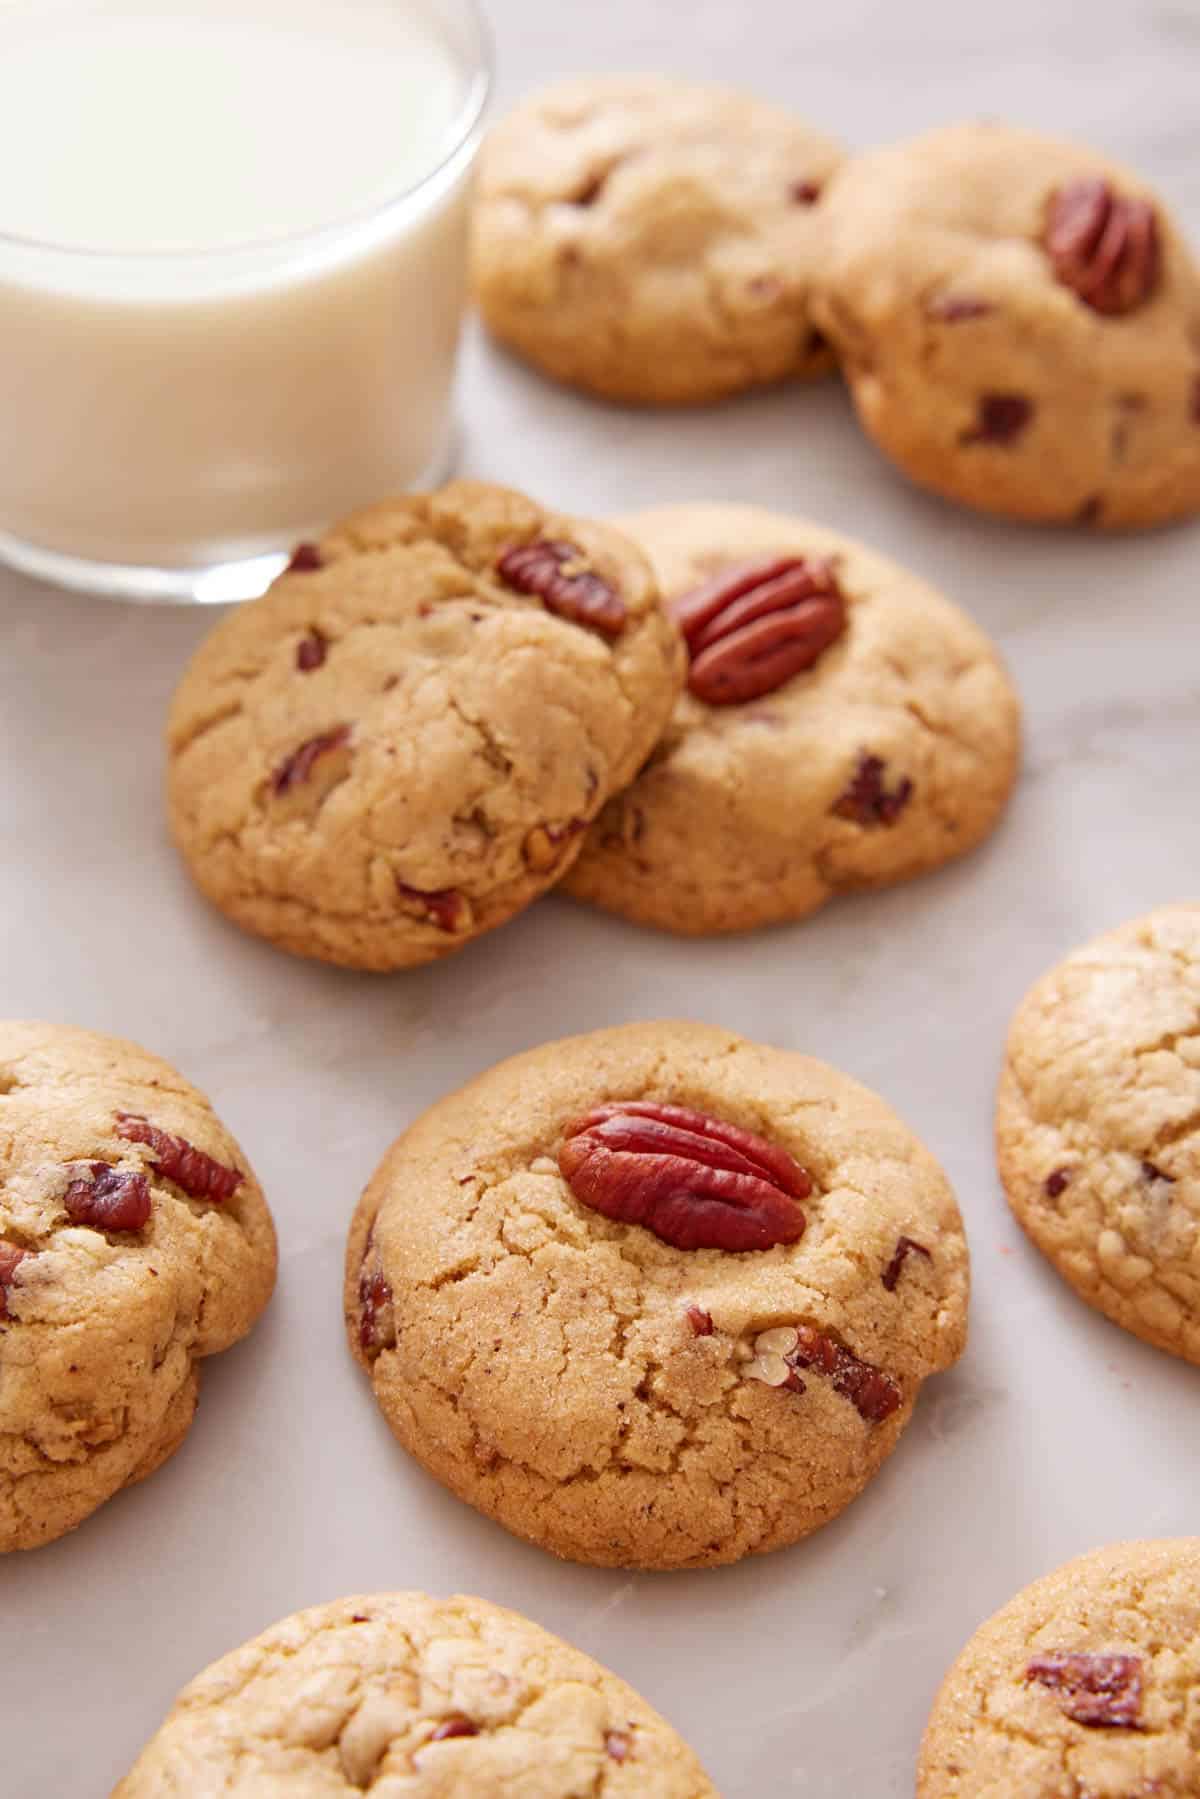 Multiple butter pecan cookies scattered on a marble counter with a glass of milk.